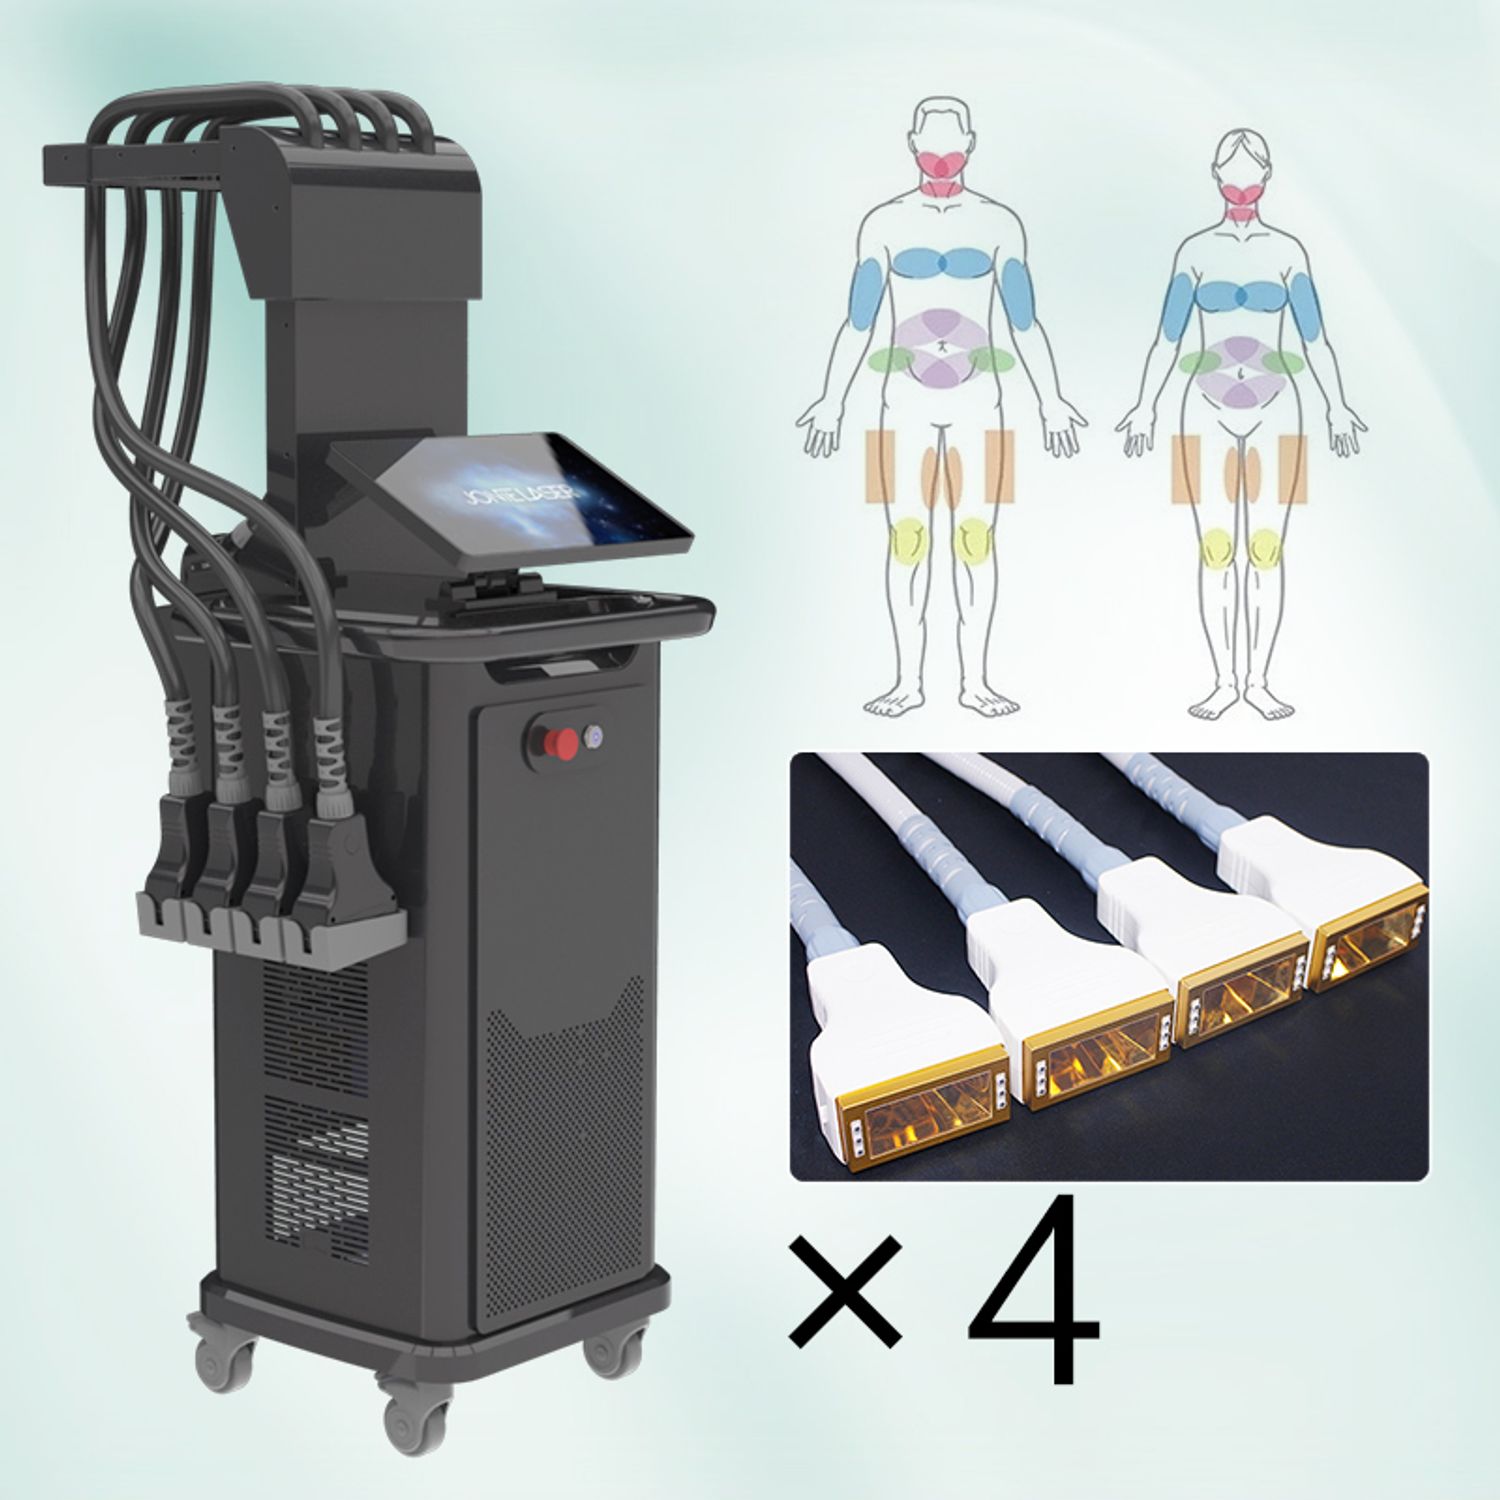 A professional laser lipo machine equipped with four applicators